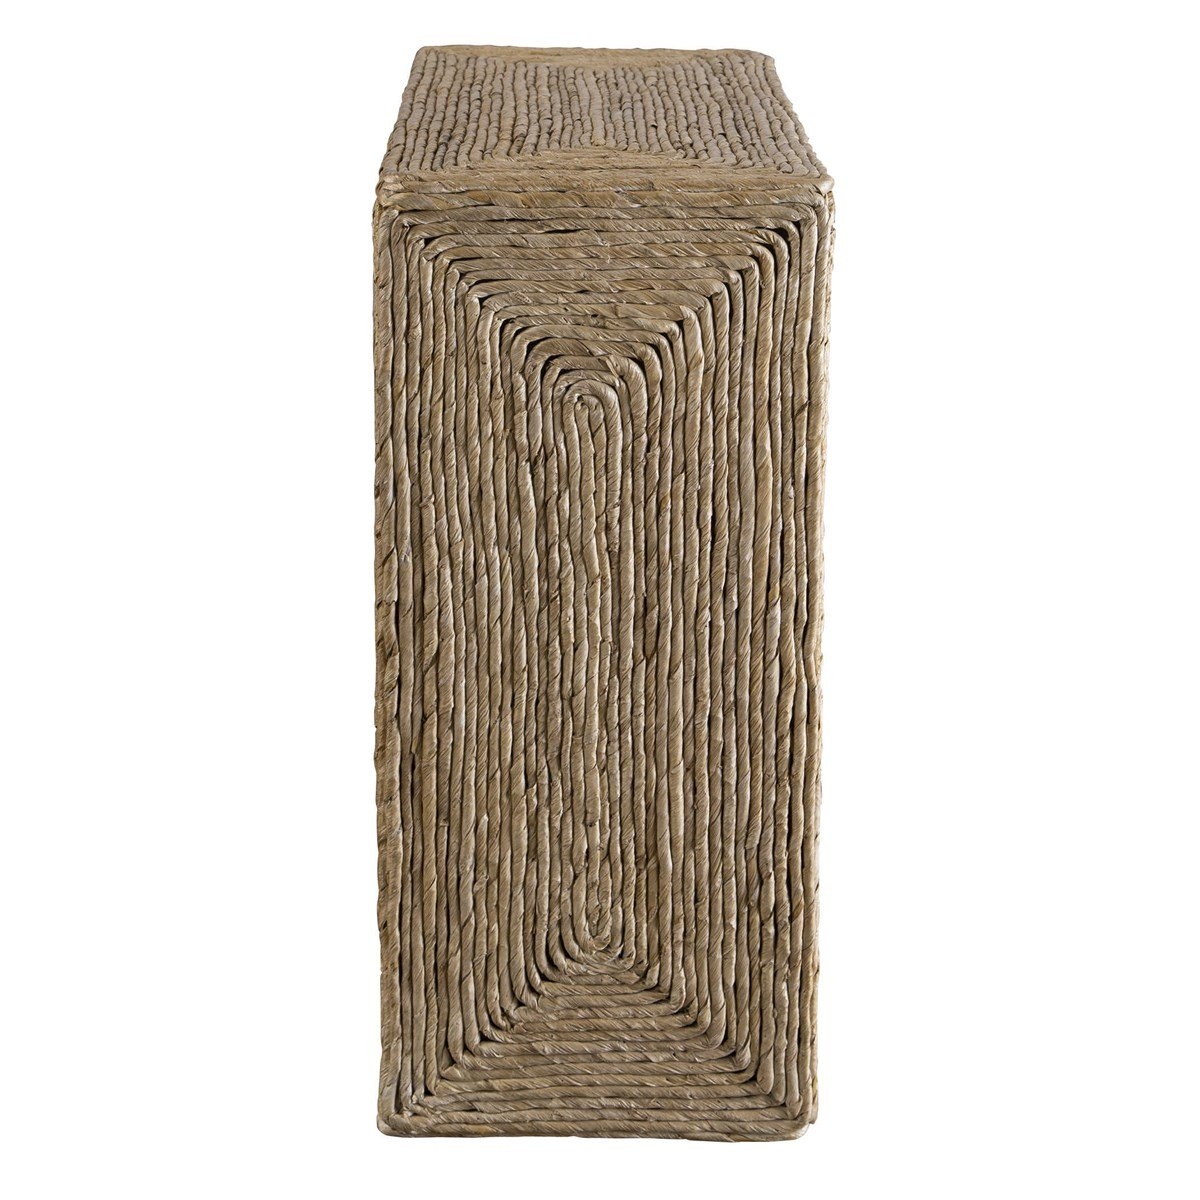 RORA SIDE TABLE - Image 2